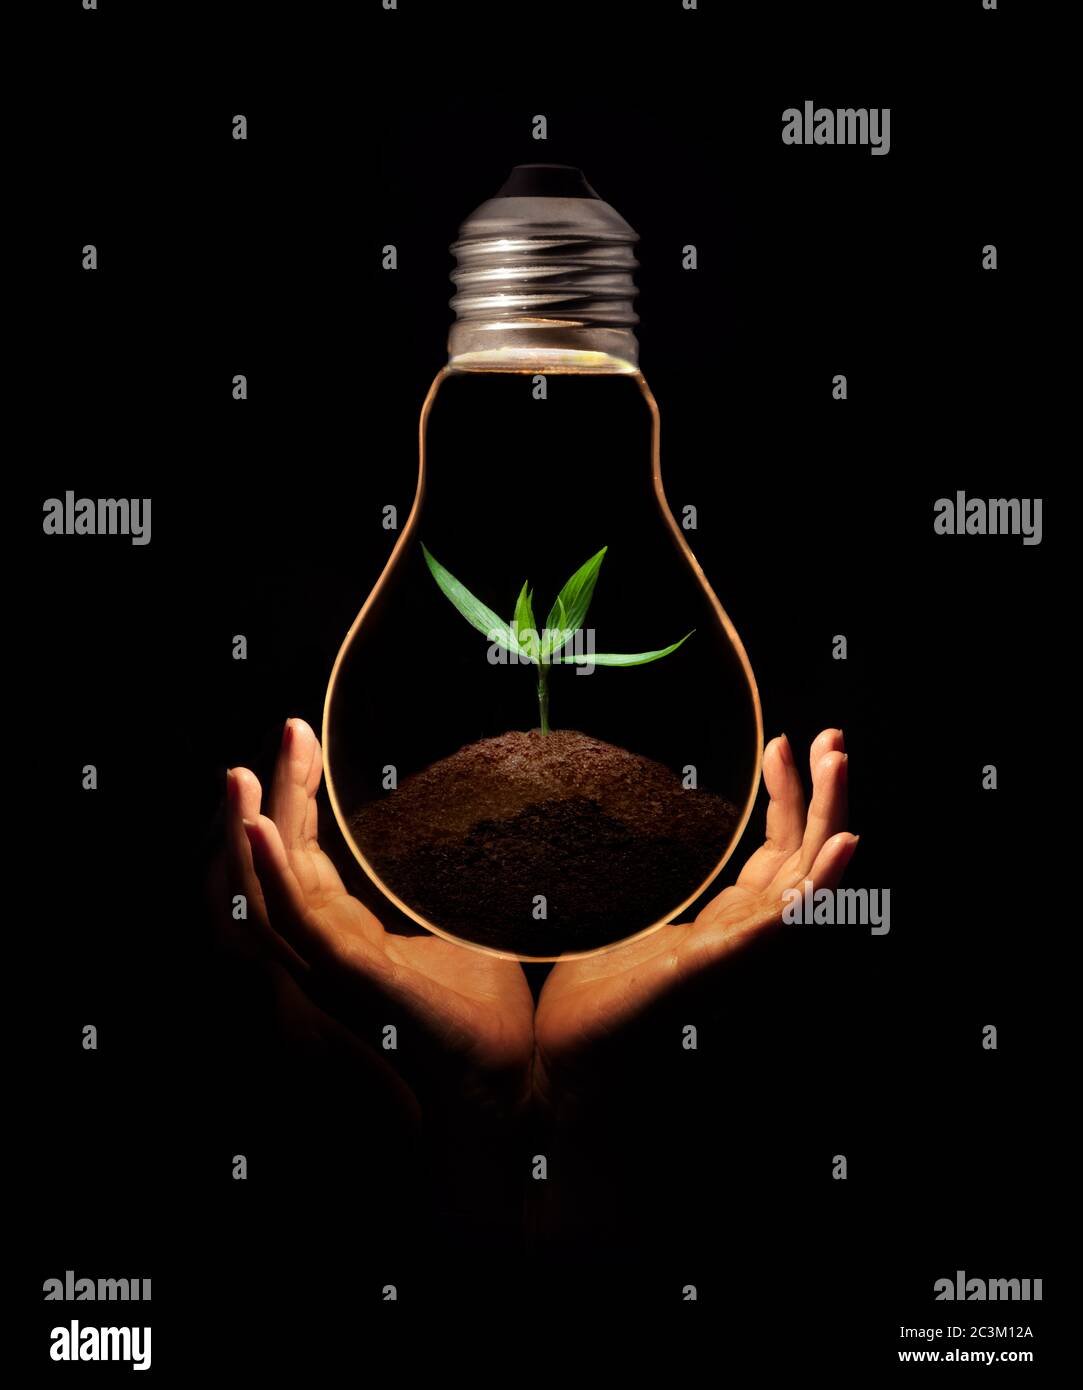 hand holding a light bulb with fresh green leaves inside, isolated on black background. Stock Photo